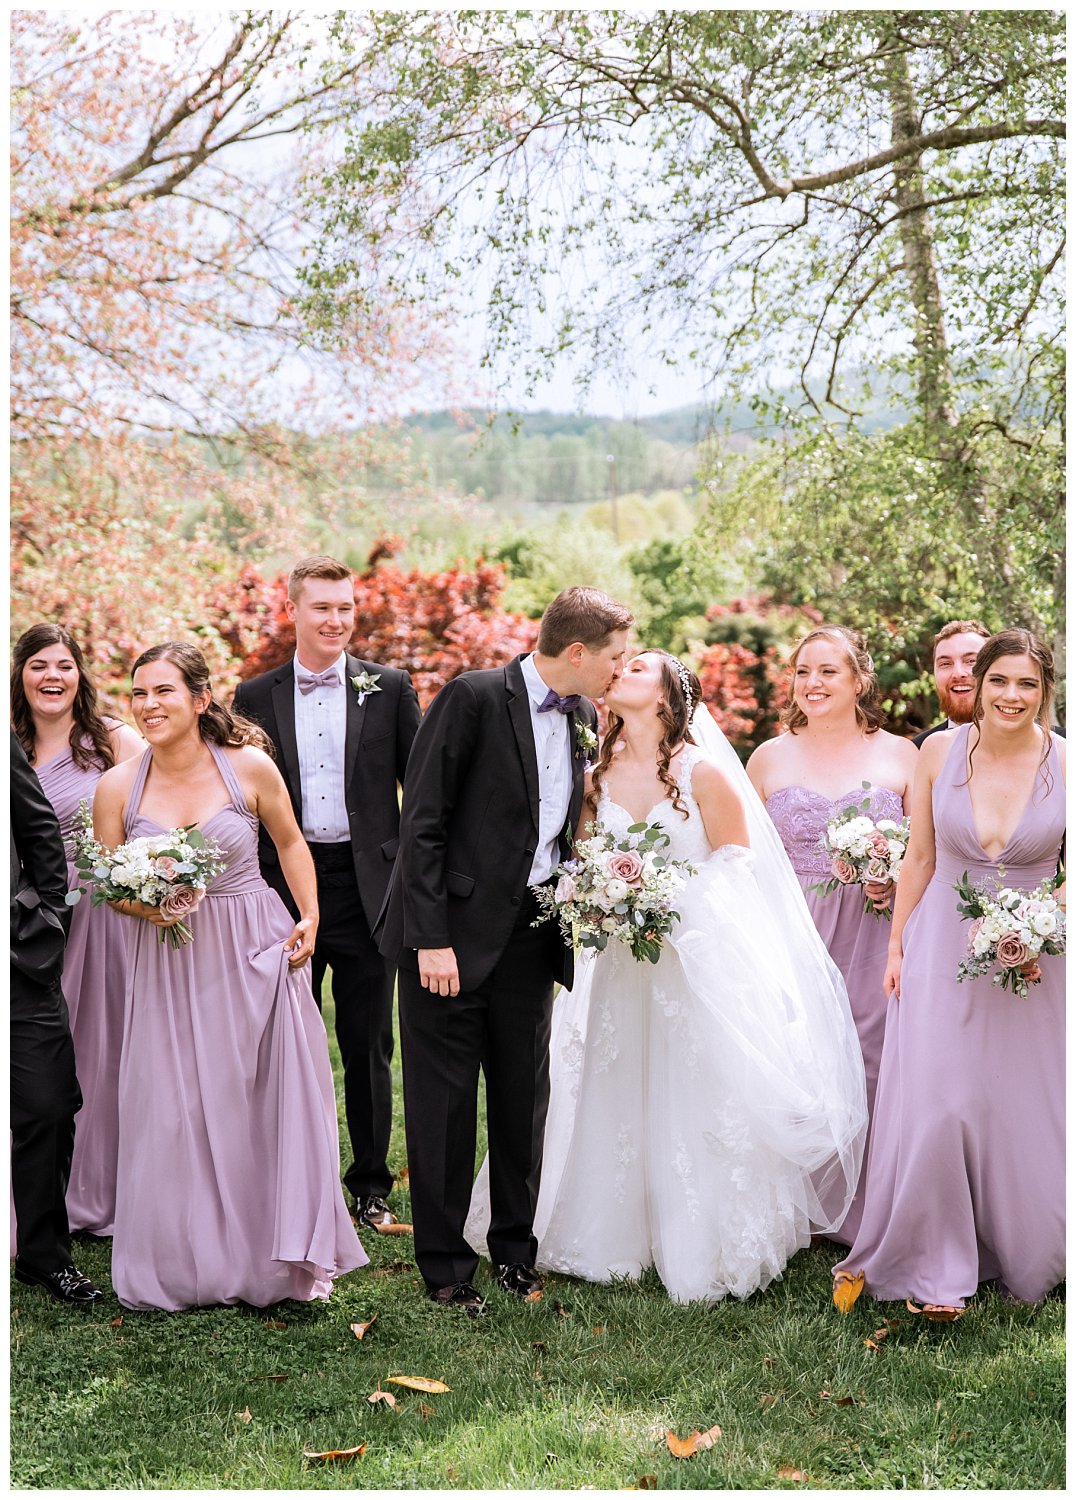 Lavender bridal party portraits for a Wedding at The Market at Grelen photographed by Heather Dodge Photography